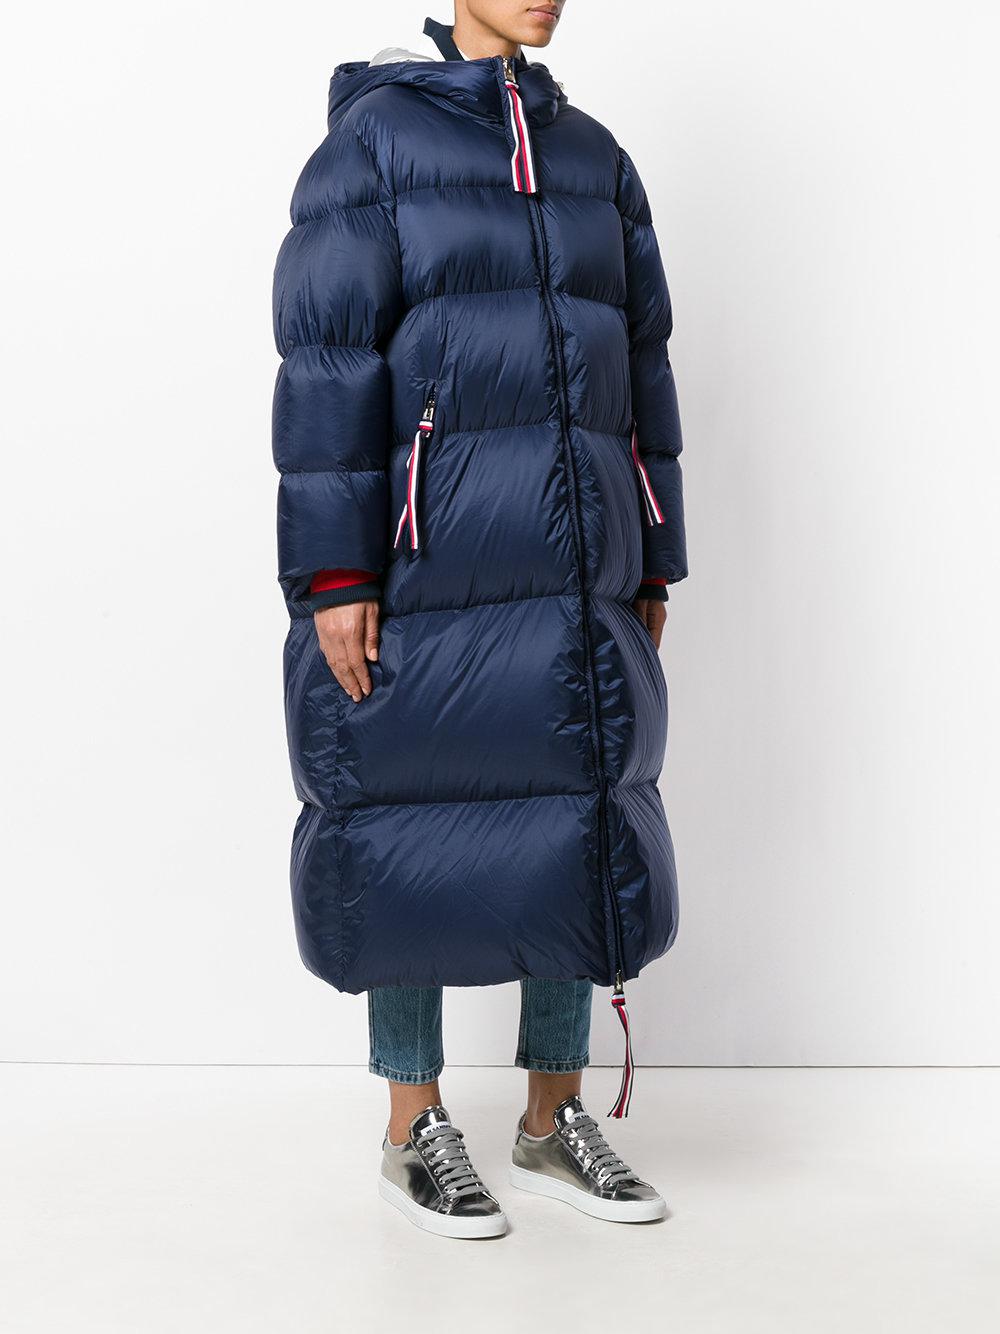 Lyst - Tommy Hilfiger Icon Oversized Down Coat in Blue